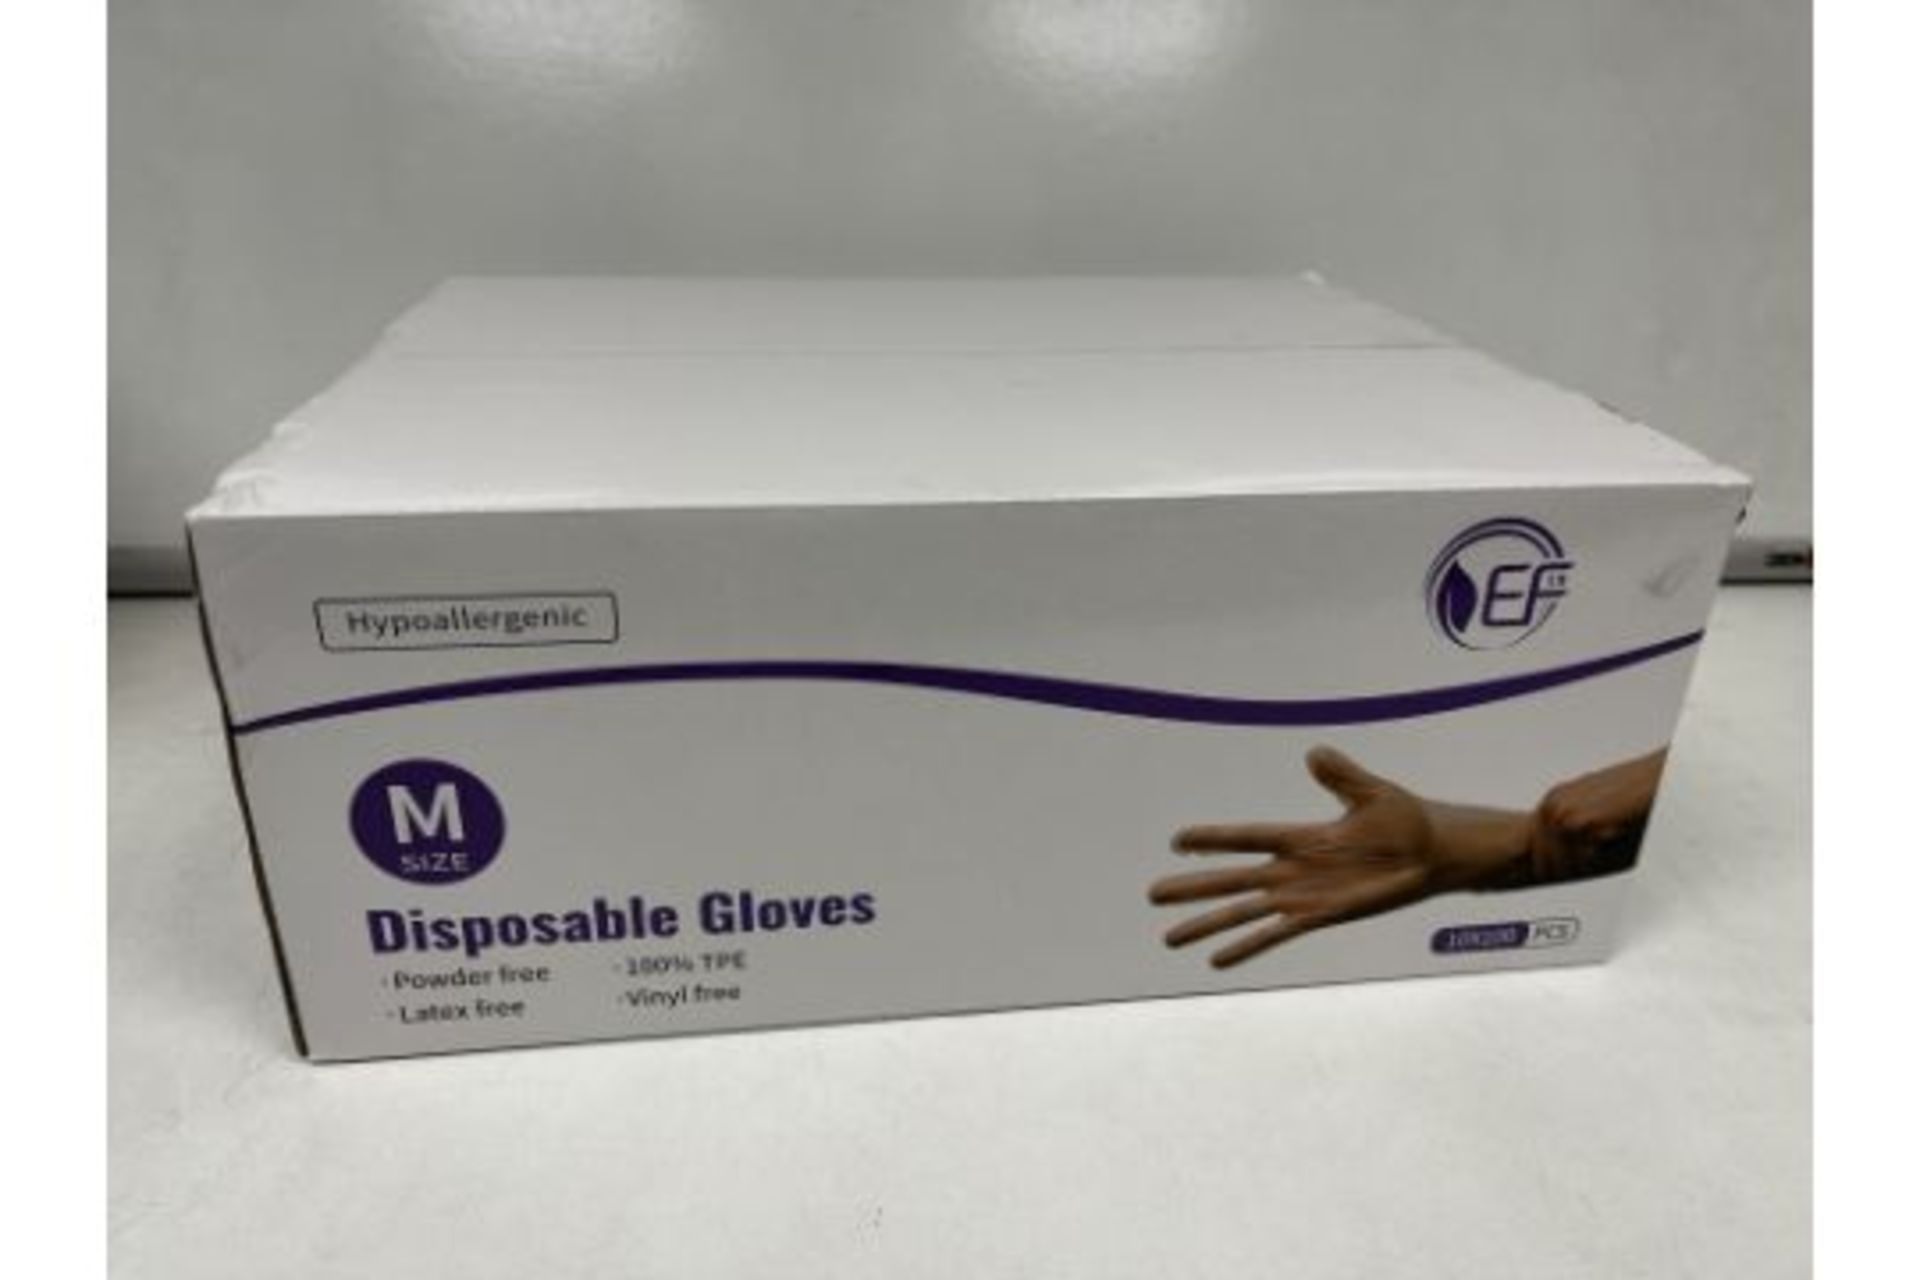 50 X BRAND NEW PACKS OF 100 CLEAR TPE DISPOSABLE GLOVES SIZE XL R2